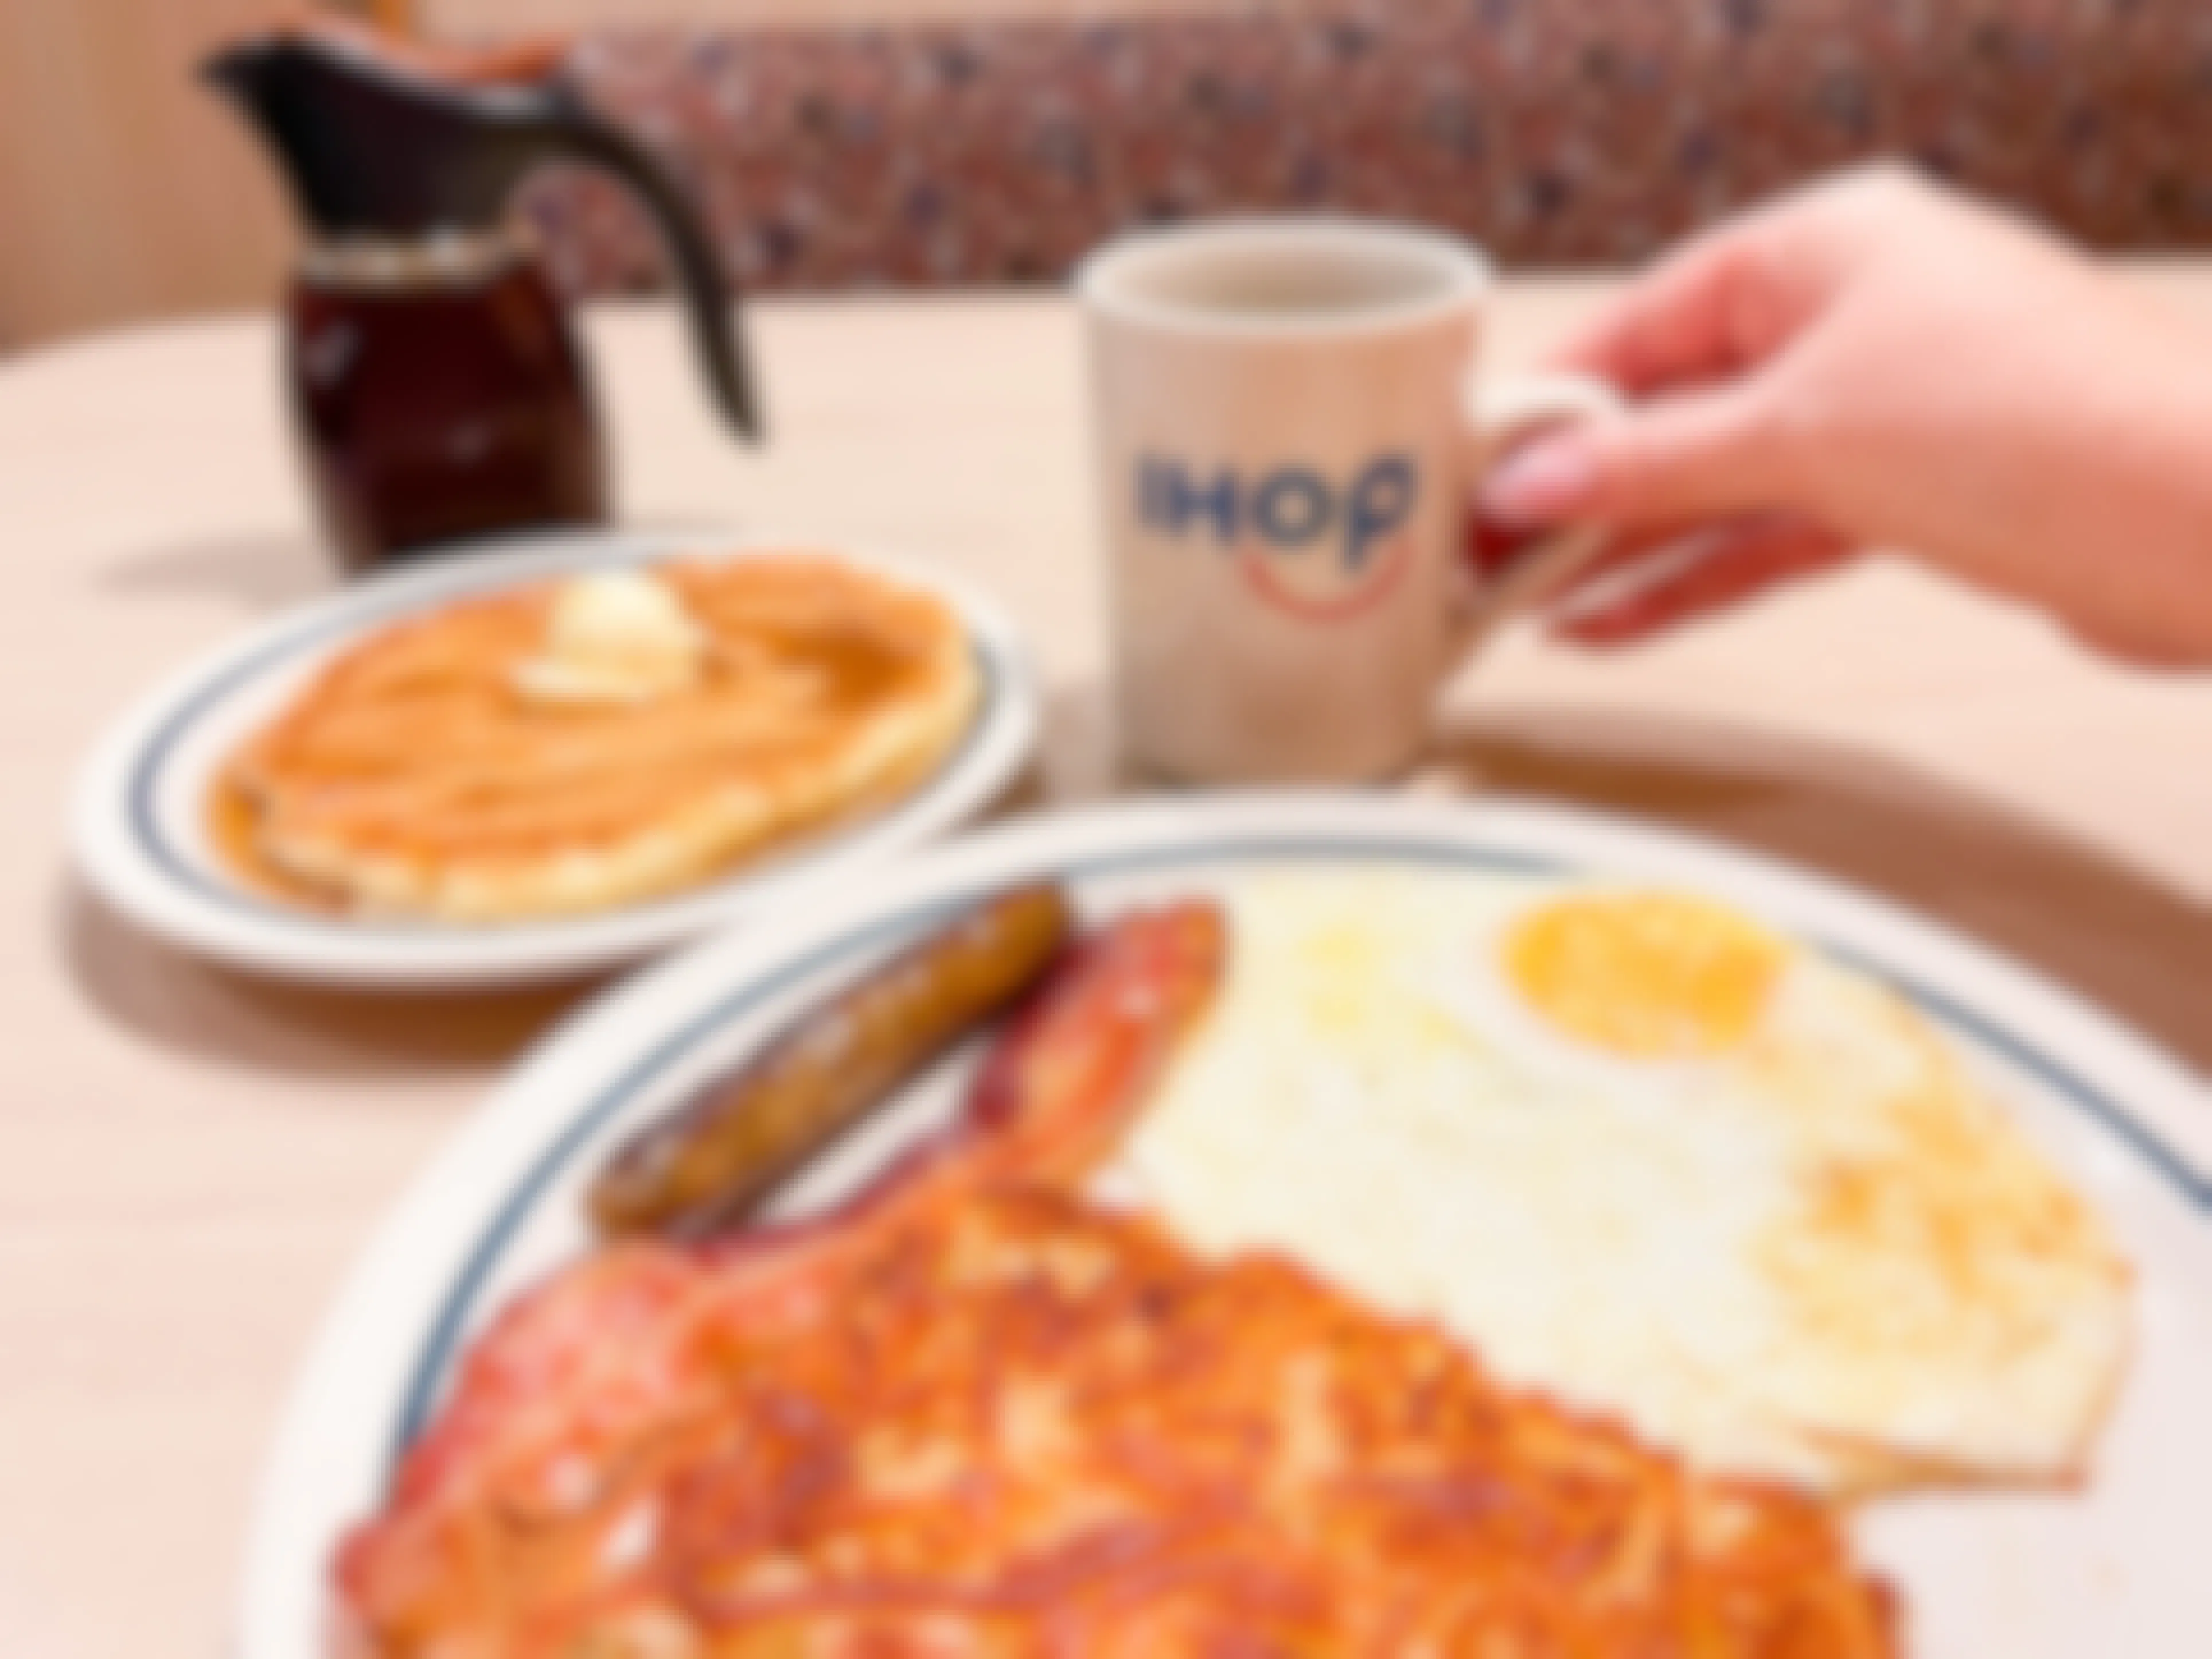 A table with plates of IHOP breakfast foods and a person's hand reaching to pick up an IHOP coffee mug.